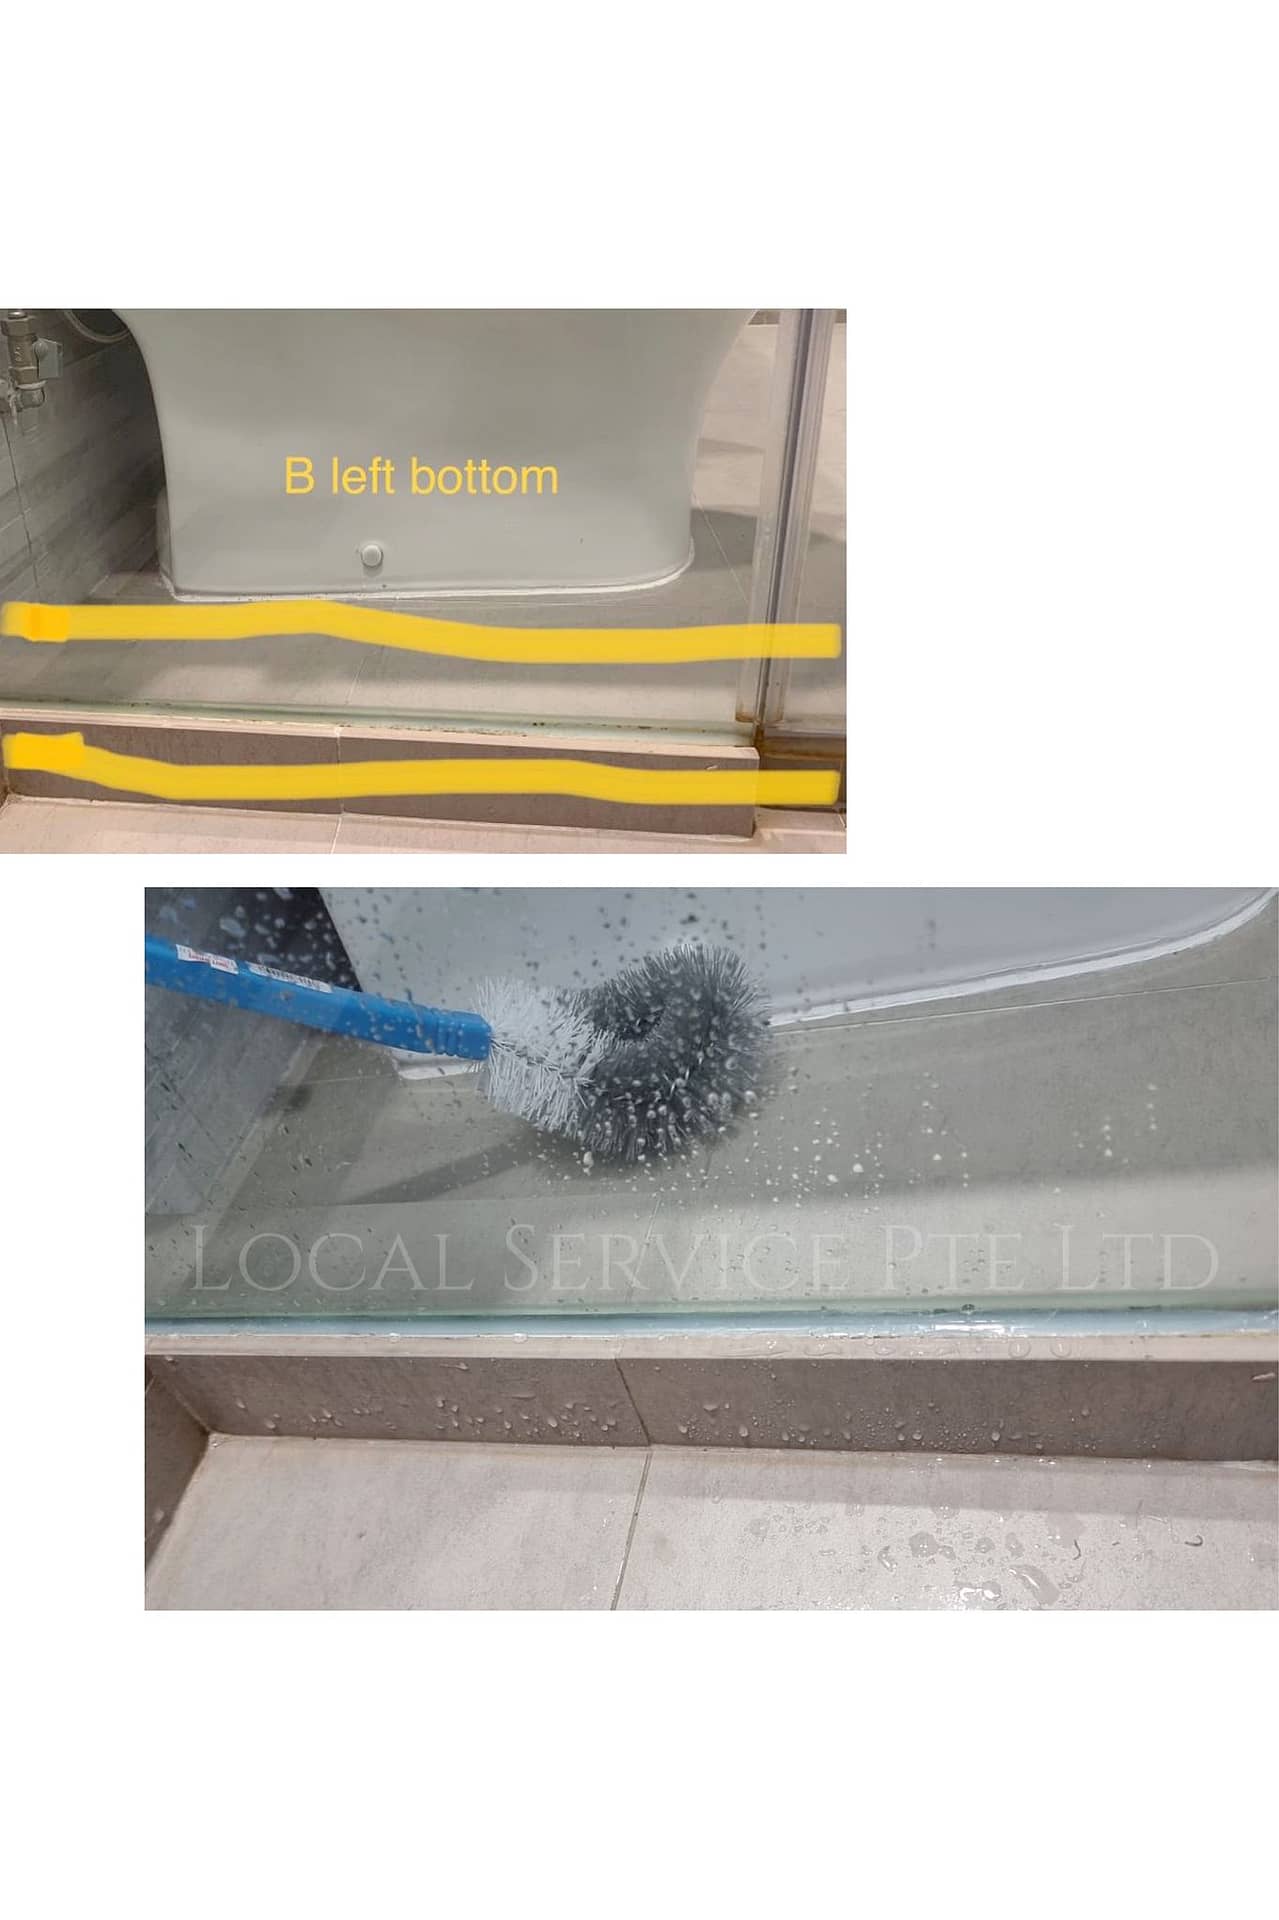 Re-silicon Shower Screen